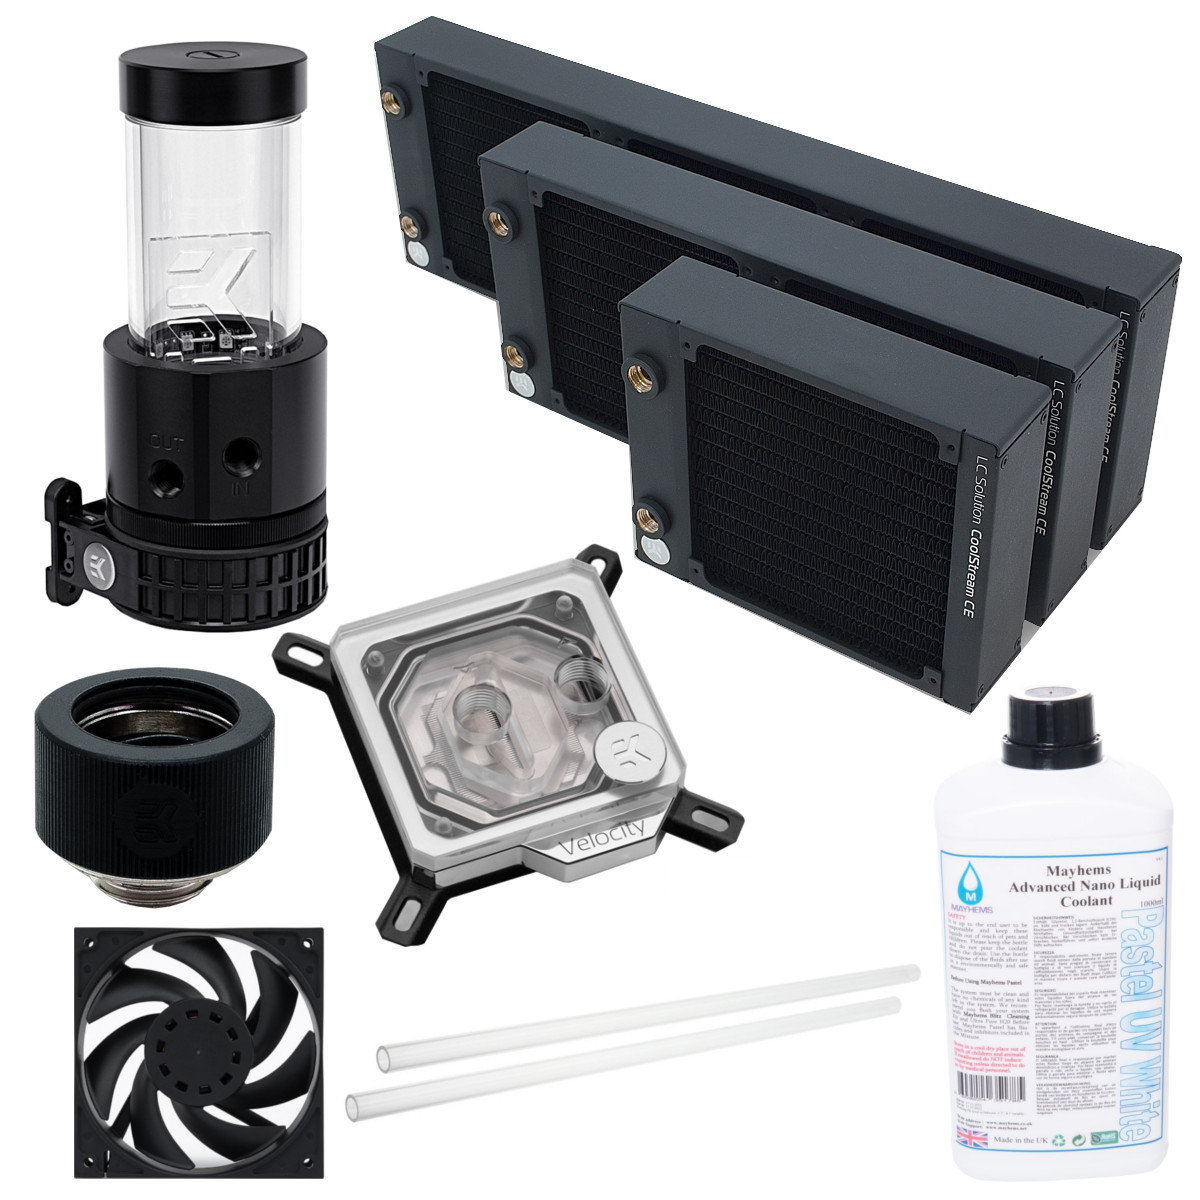 Online - Online Water Cooling Configurator - ONLINE ONLY